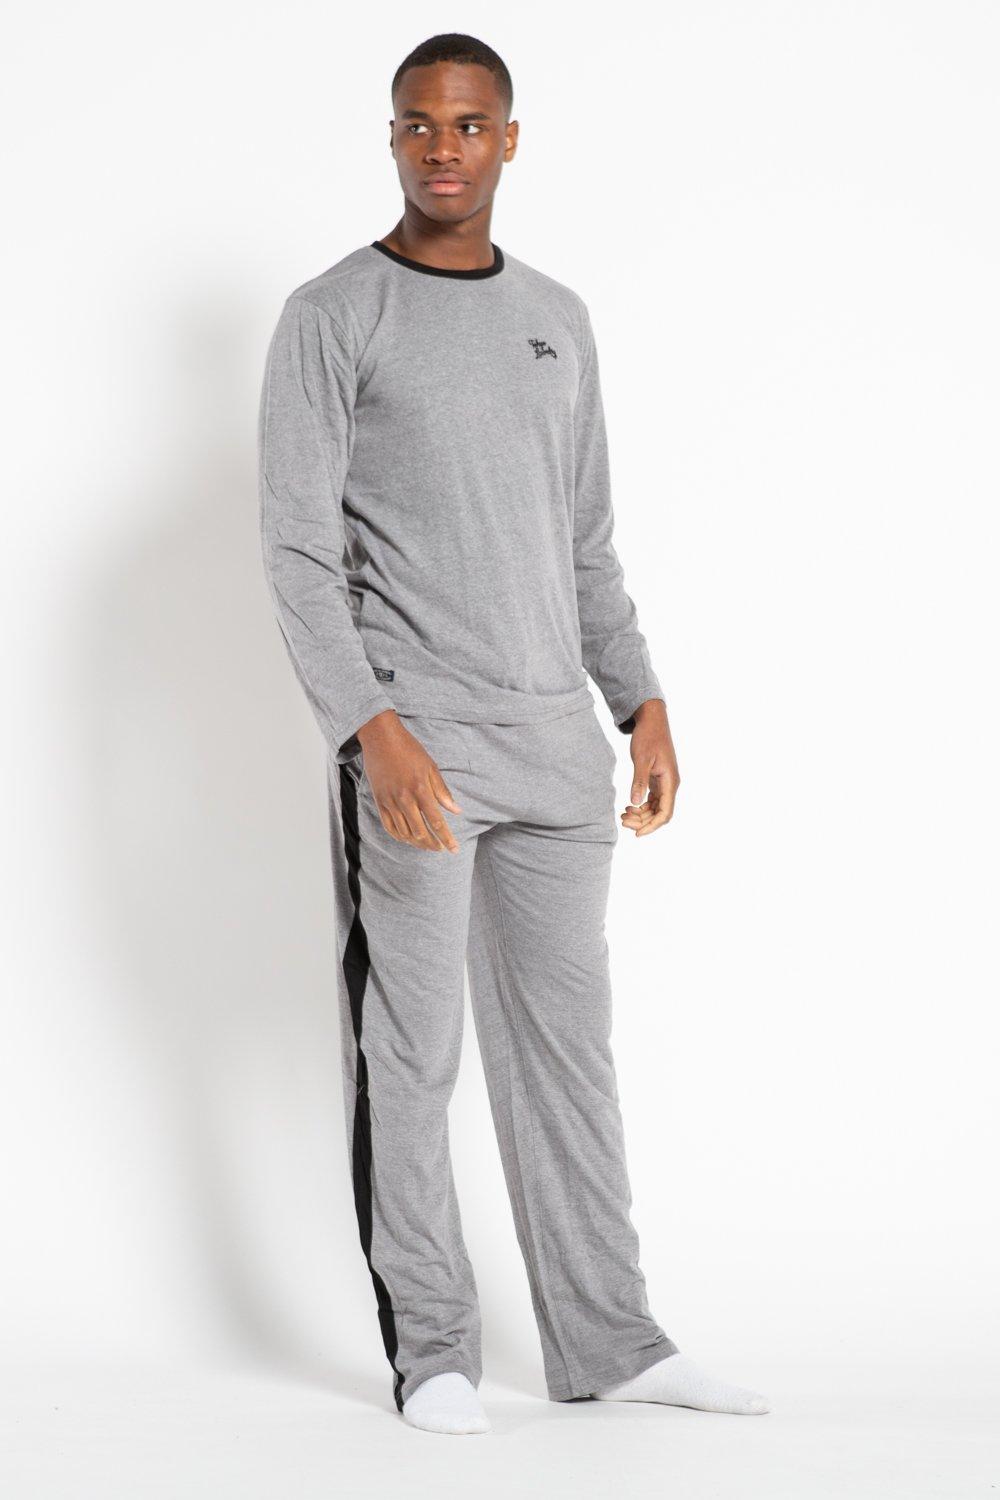 Tokyo Laundry Men's Cotton 2-Piece Long Sleeve Top and Bottoms Loungewear Set|Size: L|mid grey